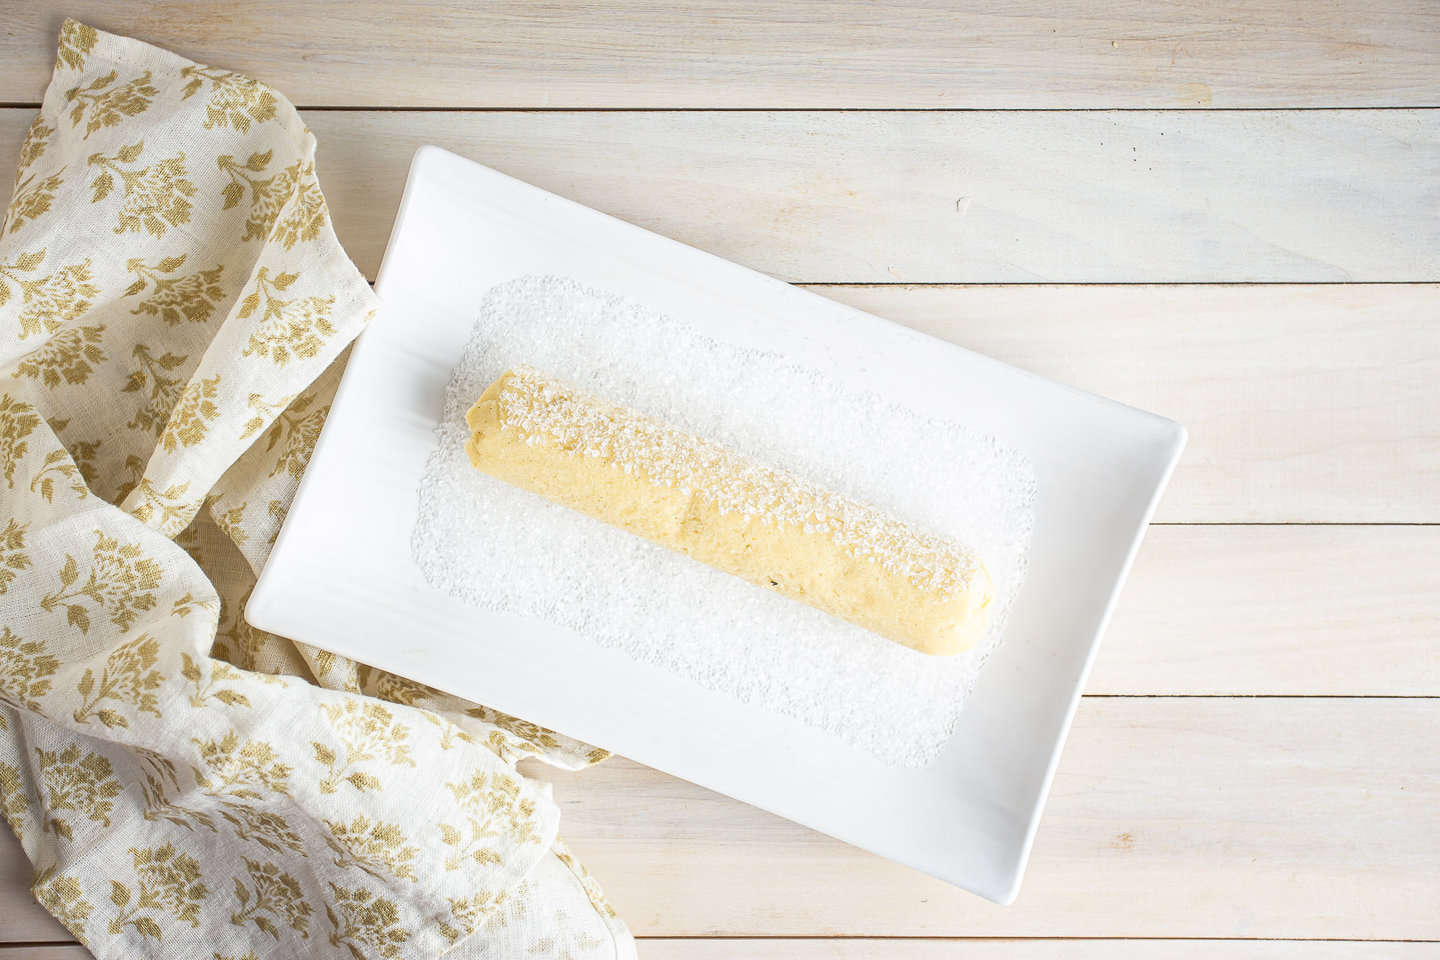 Rolling butter cookies in sparkling sugar.